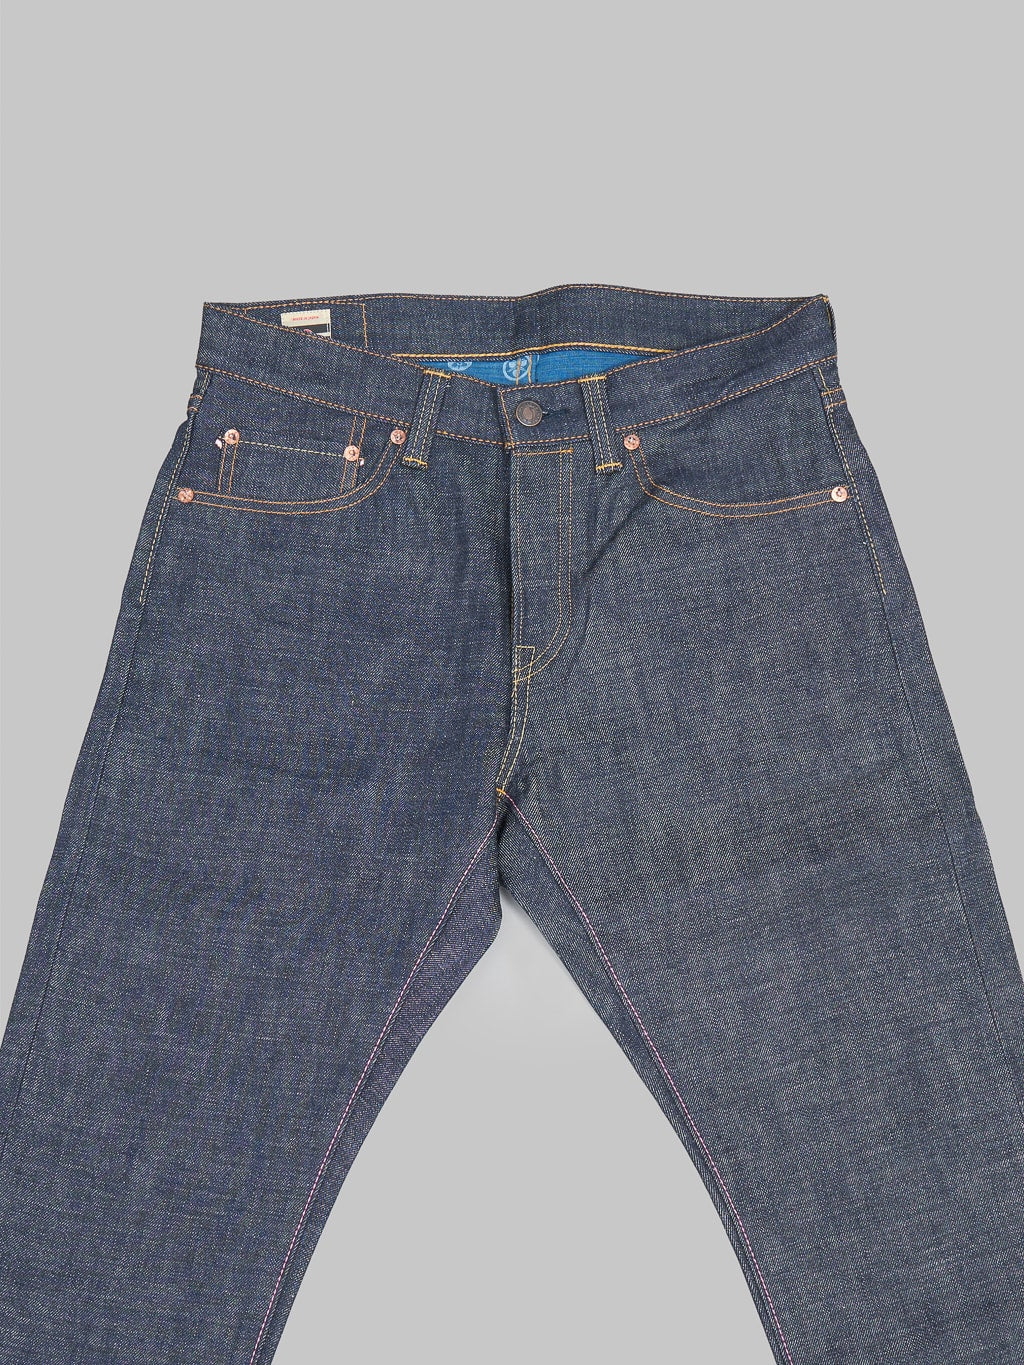 Momotaro legacy blue high tapered jeans front view